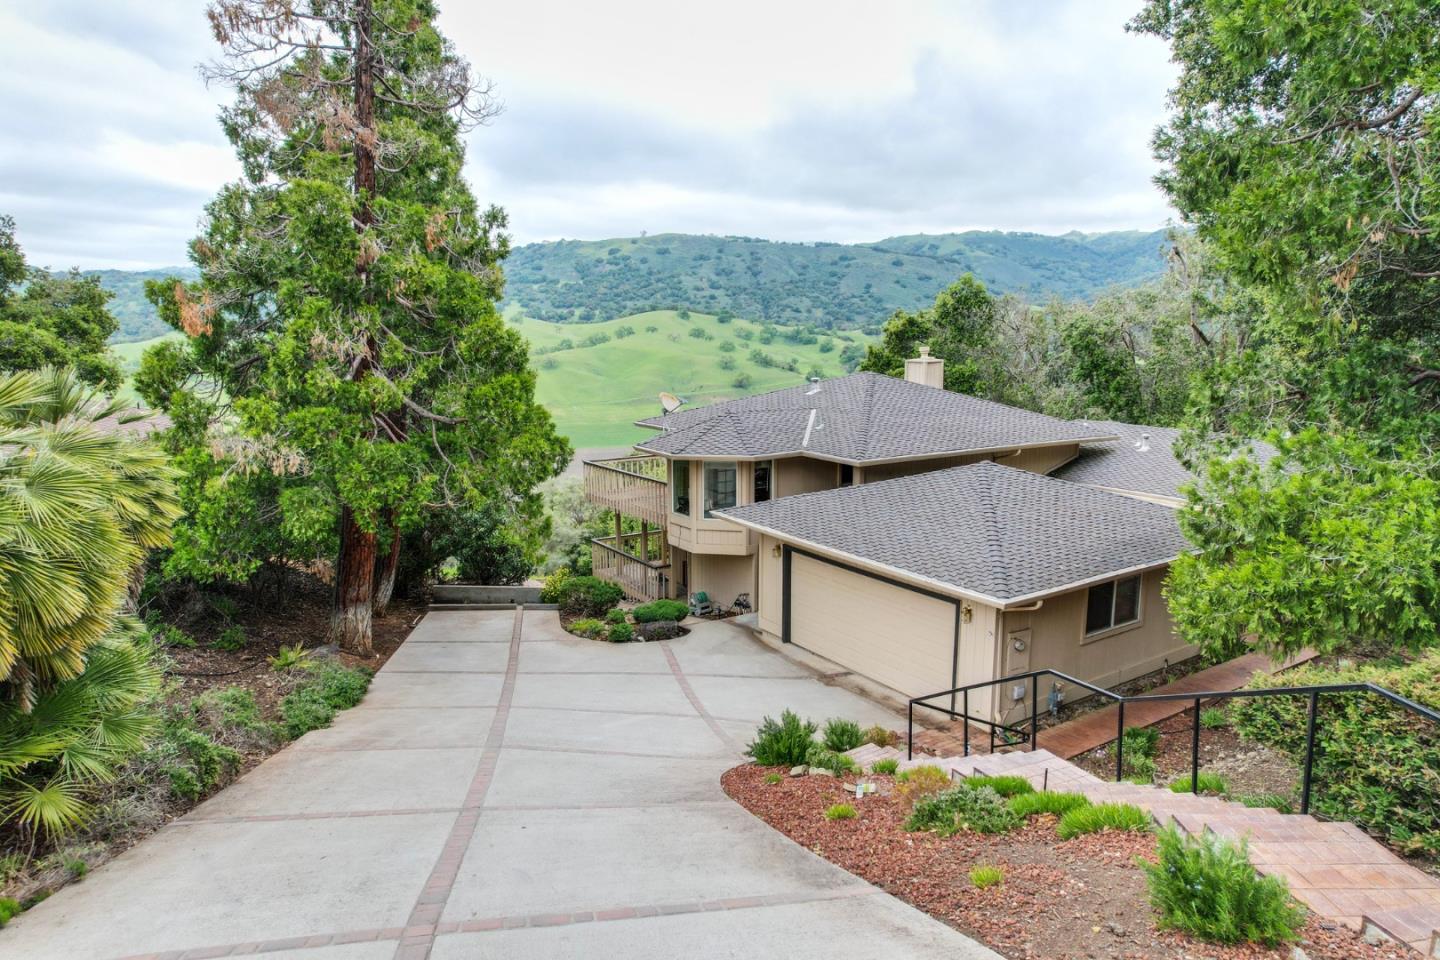 Photo of 17600 Holiday Dr in Morgan Hill, CA